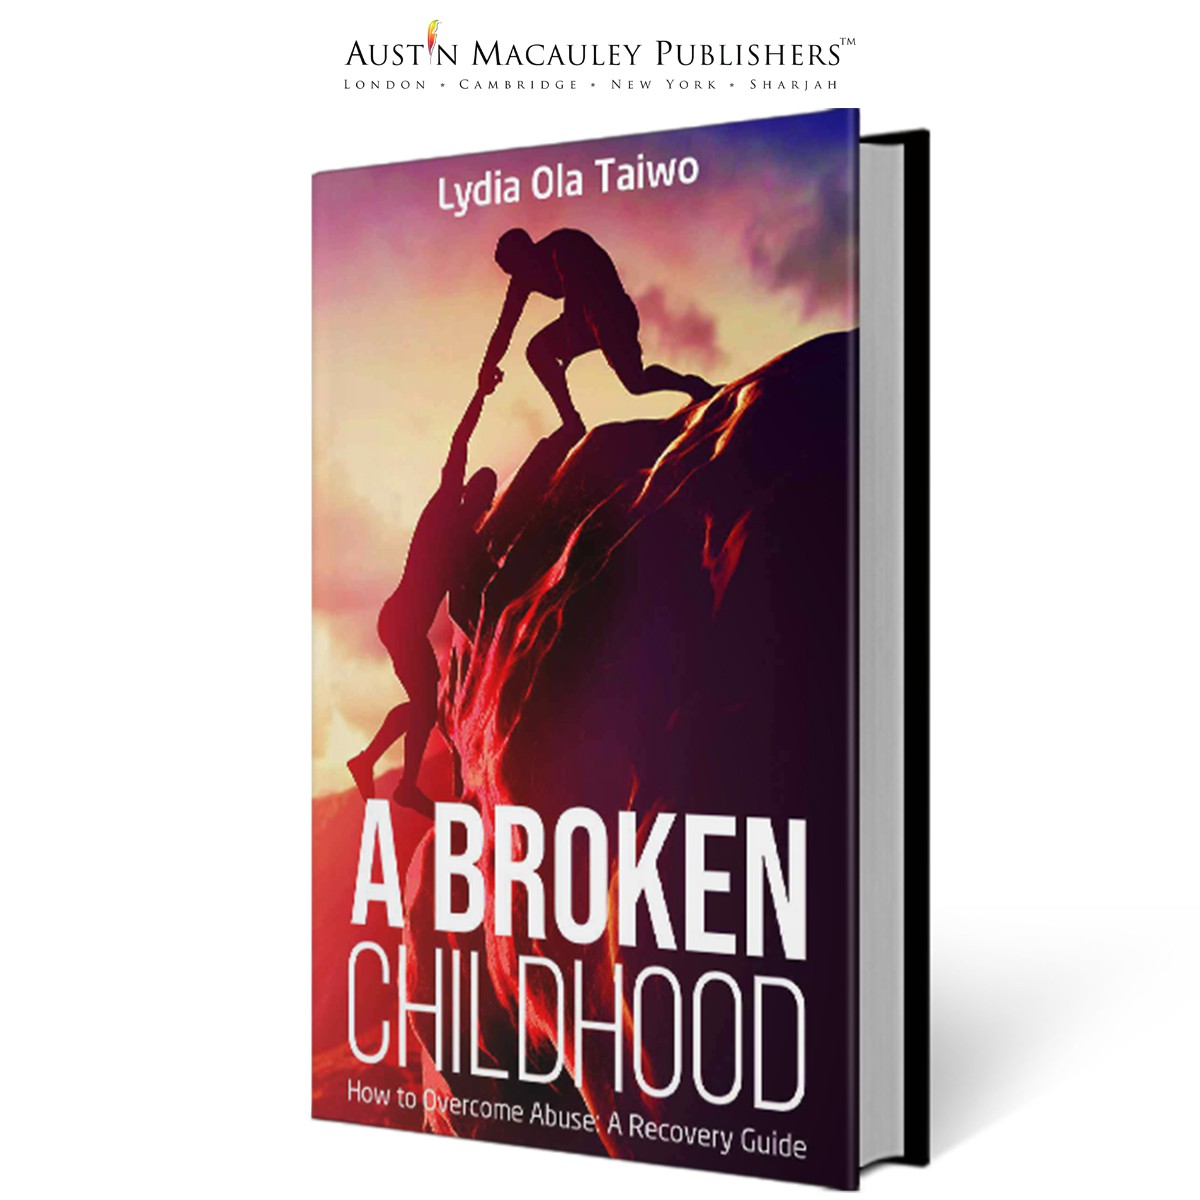 Online Book Club Nominated Lydia Taiwo’s A Broken Childhood for Book of the Year Award